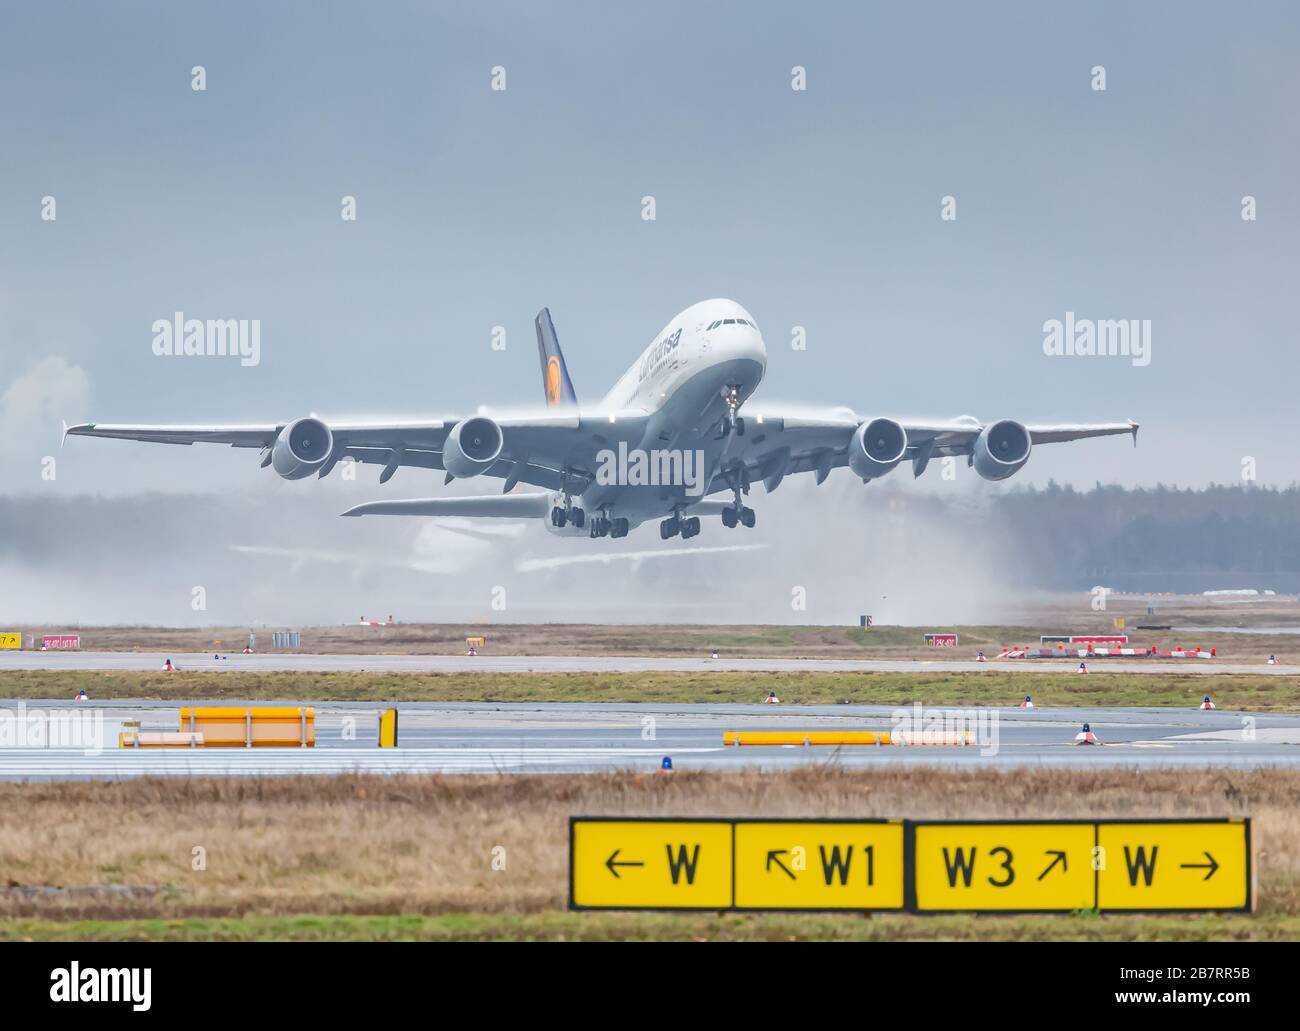 Frankfurt, Germany - February 25, 2020: Lufthansa Airbus A380-800 airplane at Frankfurt Int'l airport (FRA) in Germany. Airbus is an aircraft manufact Stock Photo